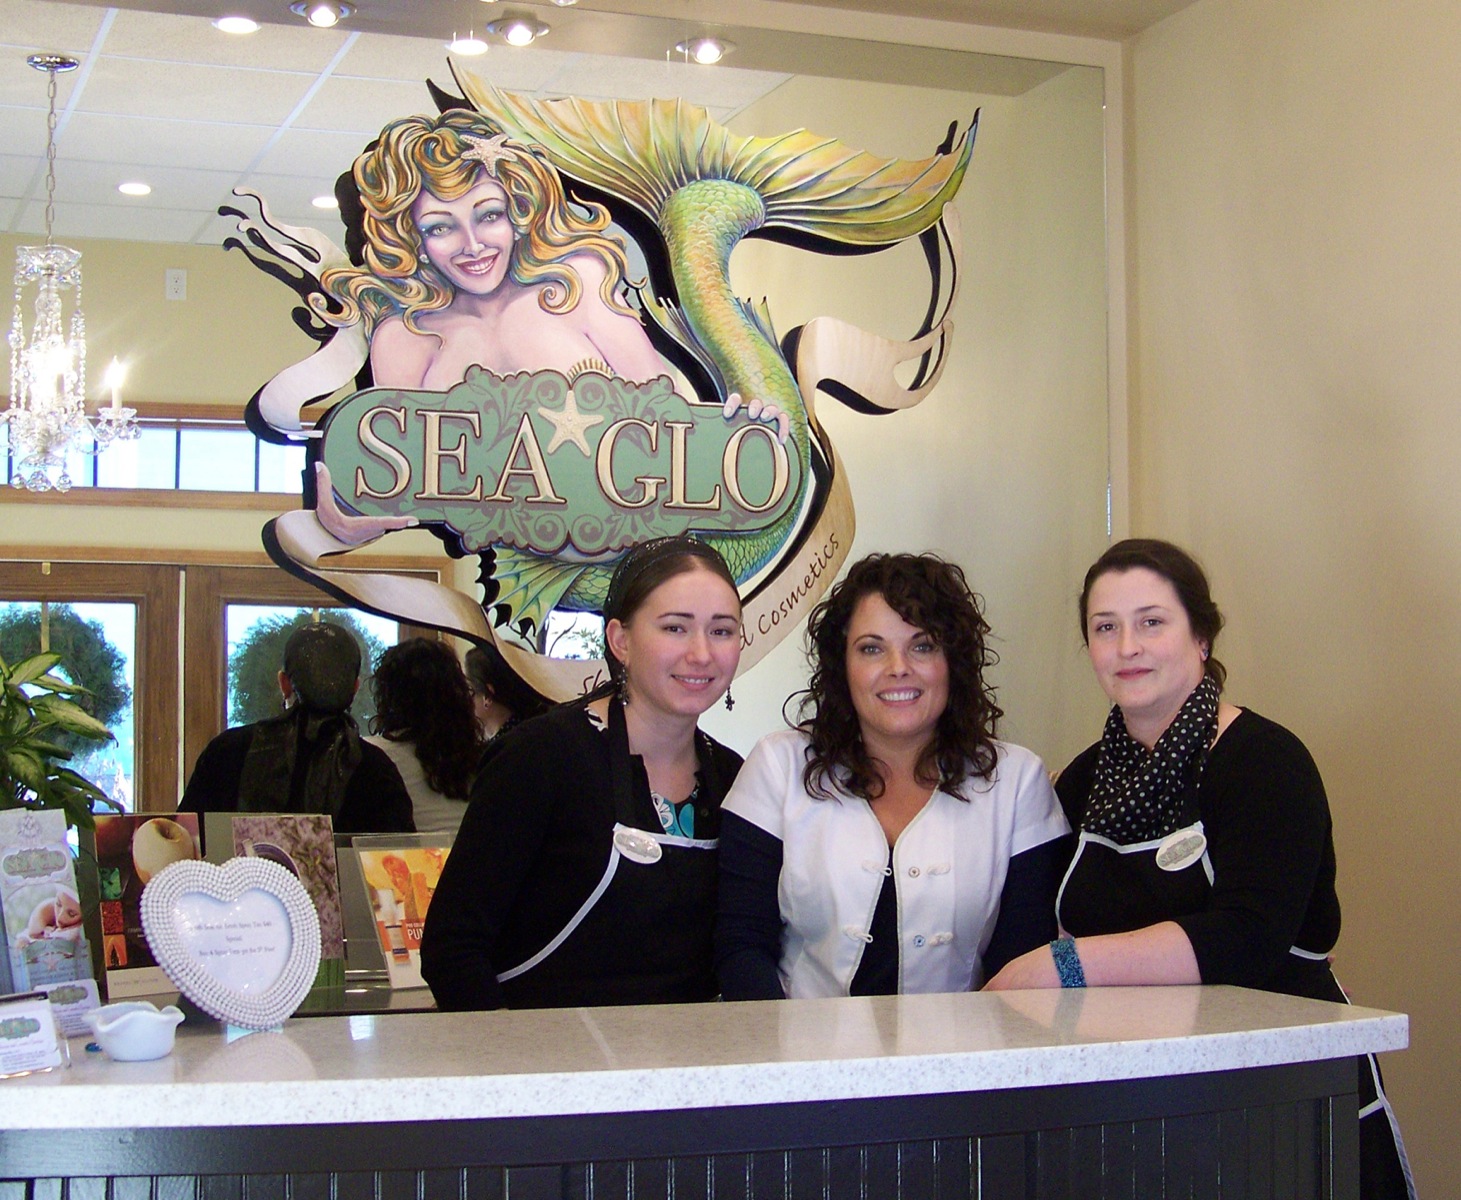 Karen Shealy, center, owner and operator of Sea Glo Skin Care and Cosmetic Boutique, poses with receptionist Antonina Martushev, left, and masseuse Melissa Mika. The boutique recently moved to a new location in Old Town.-Photo by McKibben Jackinsky, Homer News